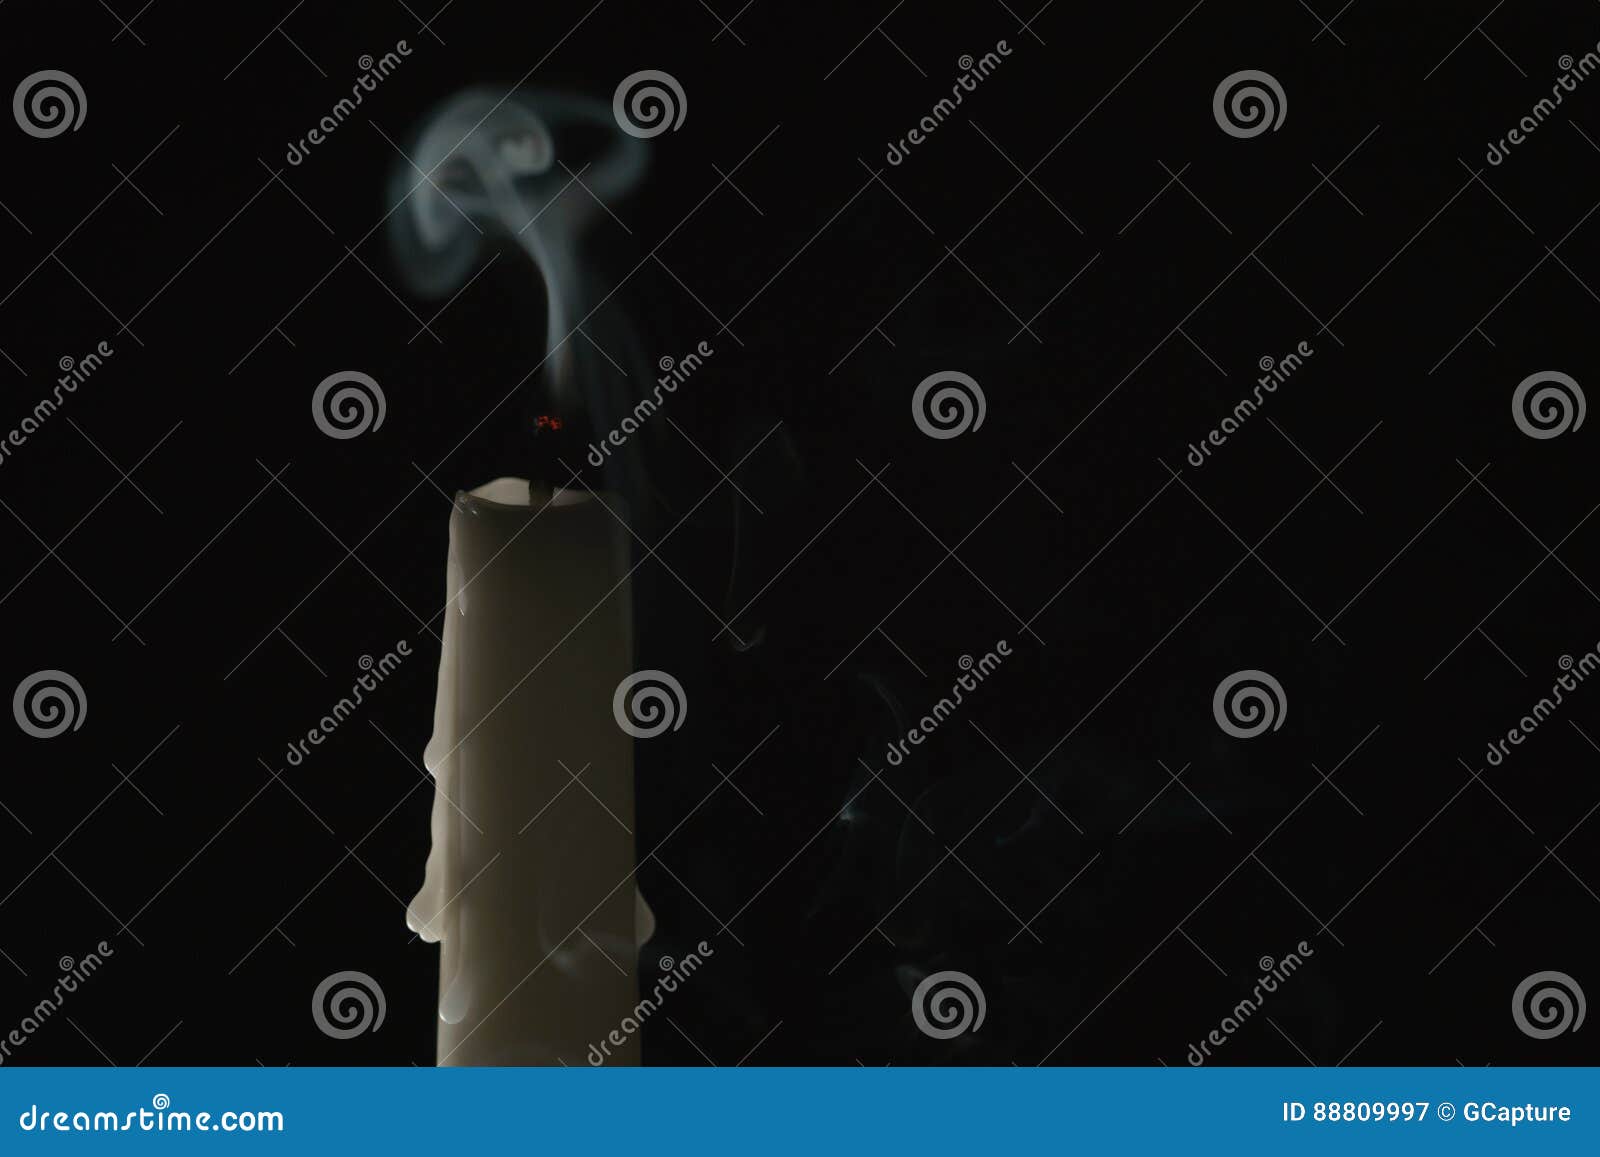 Tall Candle With Smoke Trail Over Black Background Stock Image Image